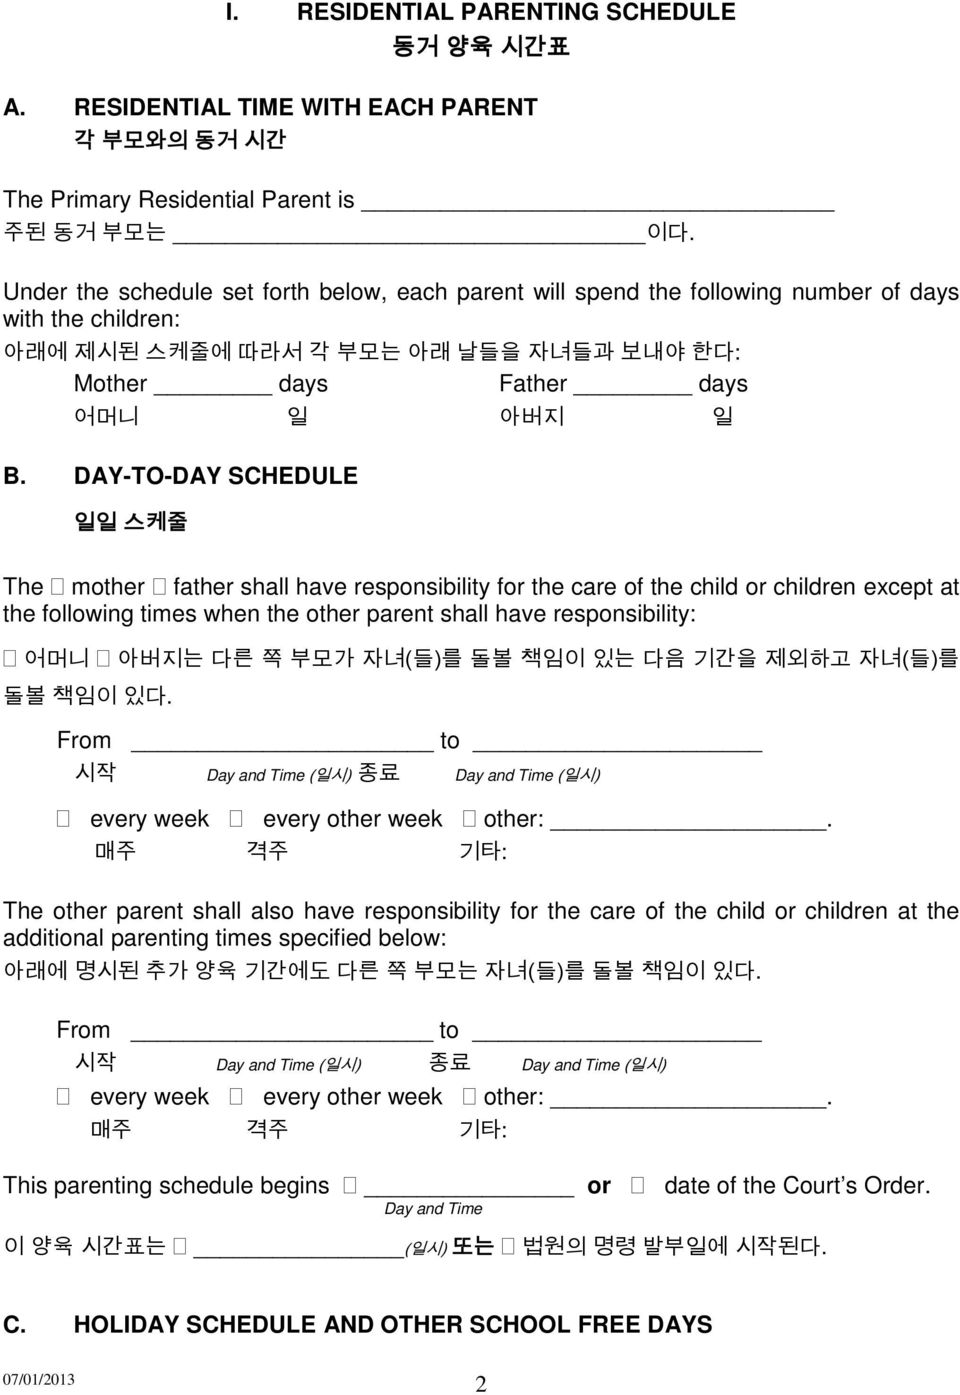 DAY-TO-DAY SCHEDULE 일일 스케줄 The mother father shall have responsibility for the care of the child or children except at the following times when the other parent shall have responsibility: 어머니 아버지는 다른